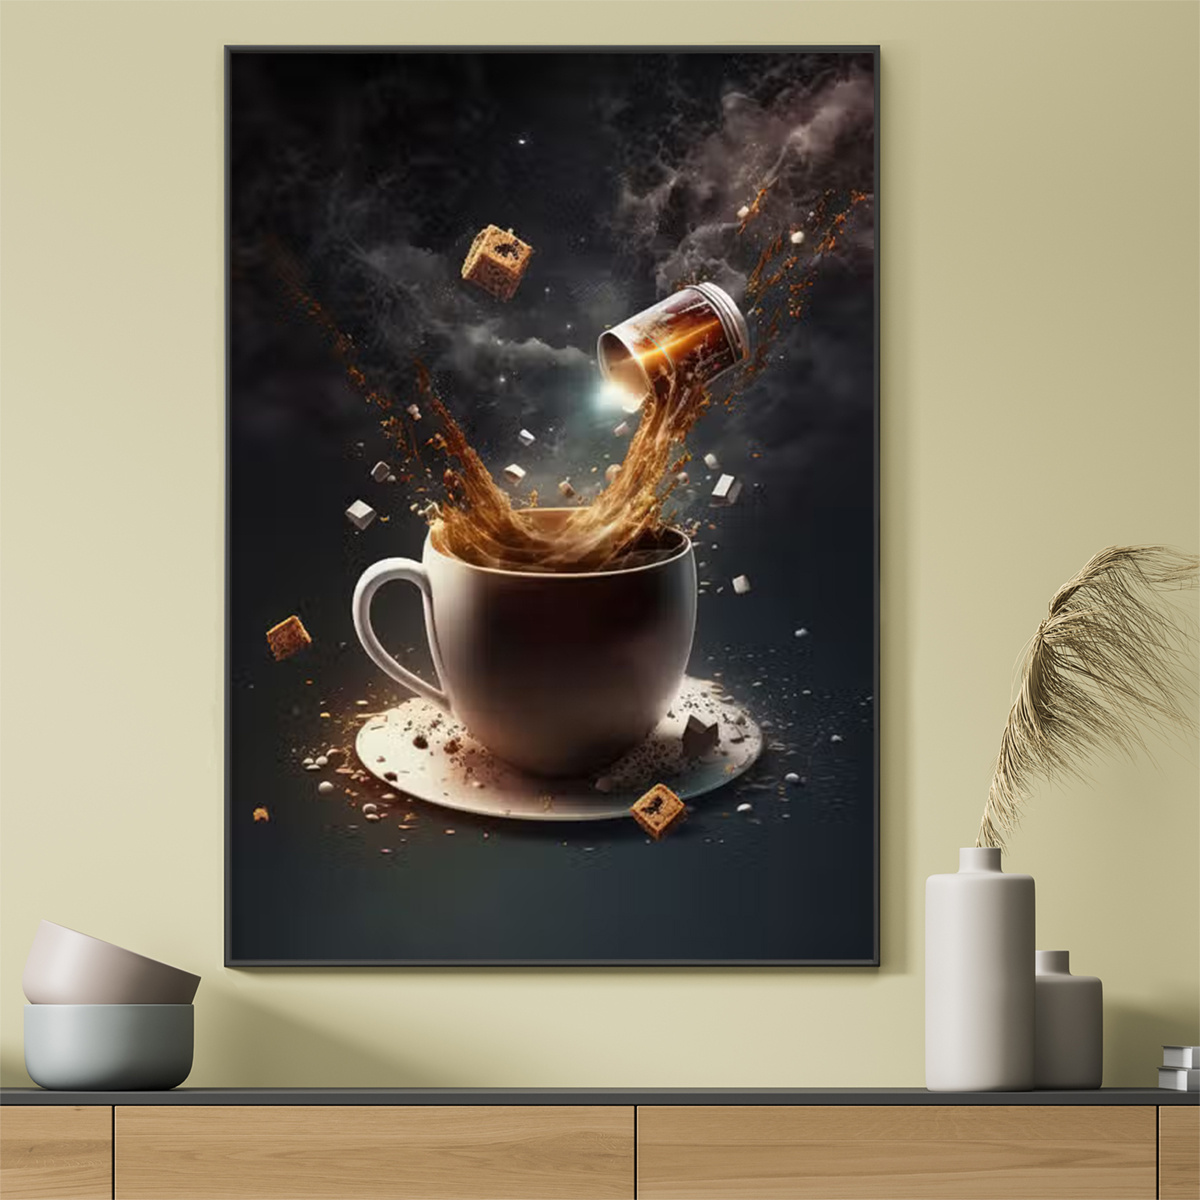 

1pc A Coffee Cup In Space Canvas Wall Art For Home Decor, Coffee Lovers Poster Wall Decor High Quality Canvas Prints For Living Room Bedroom Kitchen Office Cafe Decor, Perfect Gift And Decoration